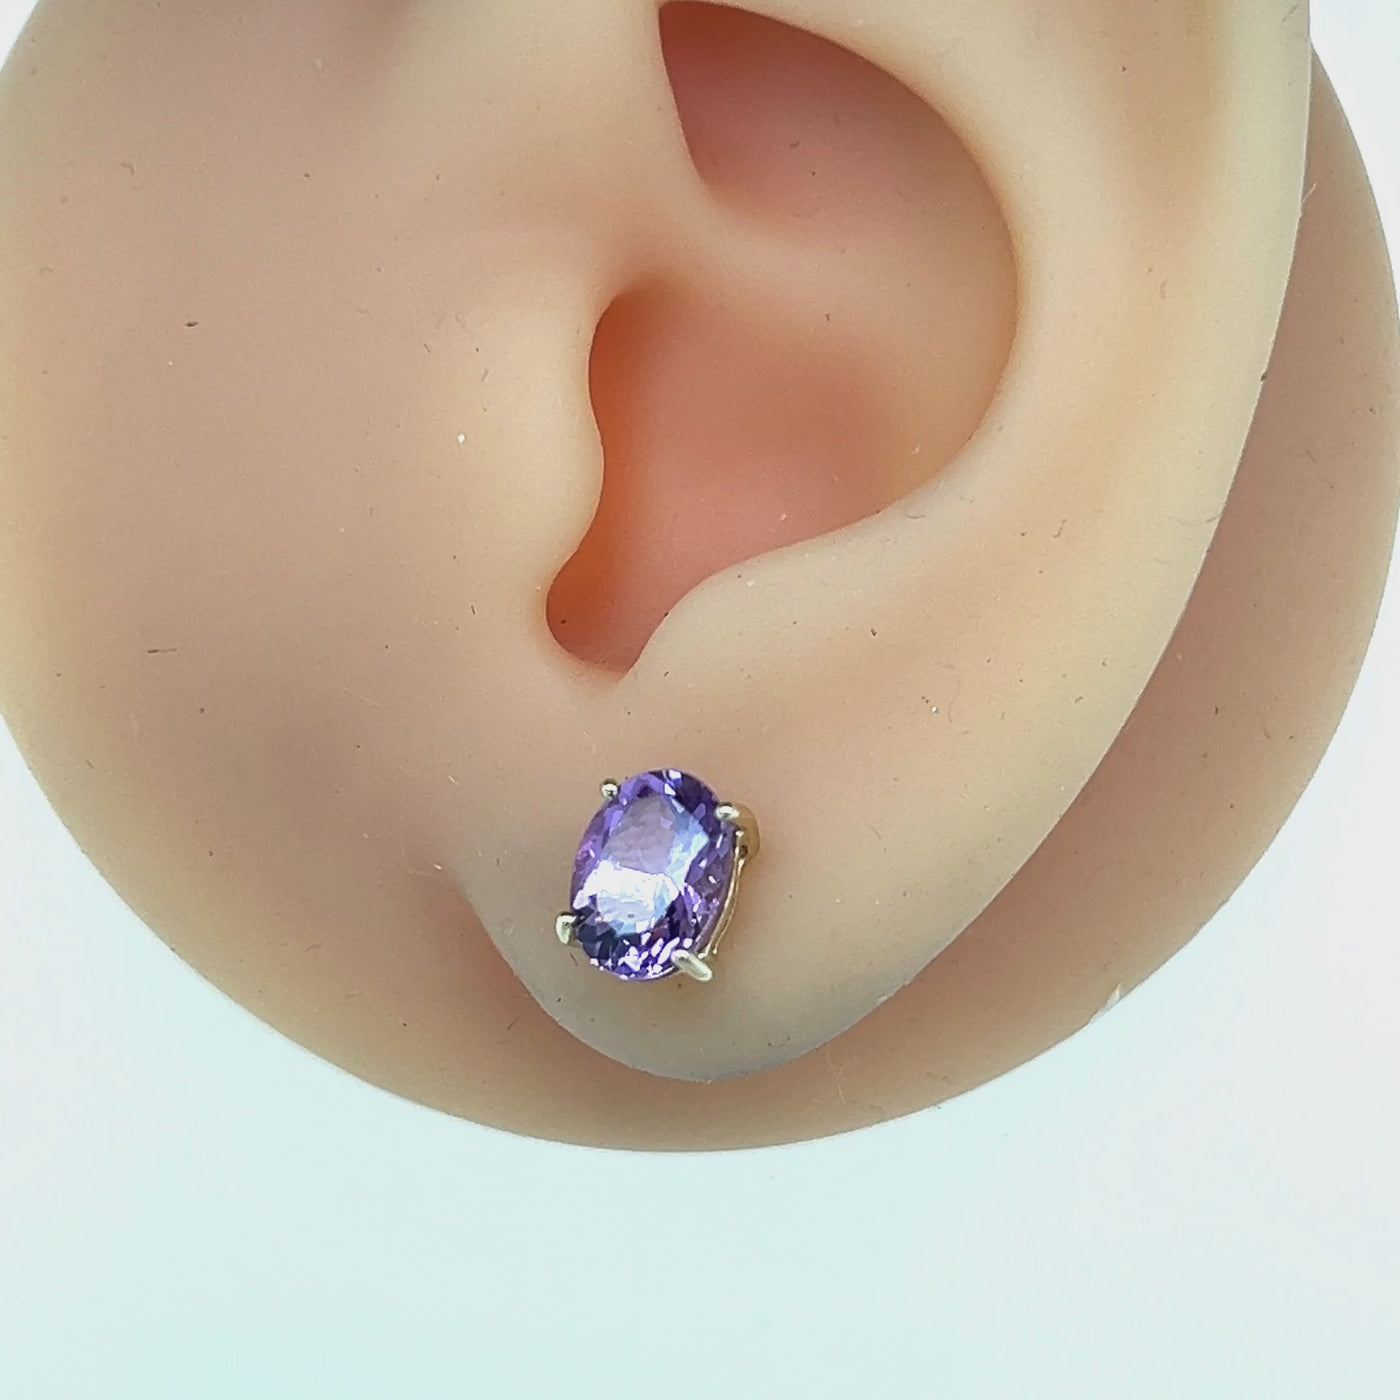 9ct Yellow Gold Oval Amethyst Solitaire Stud Earrings.